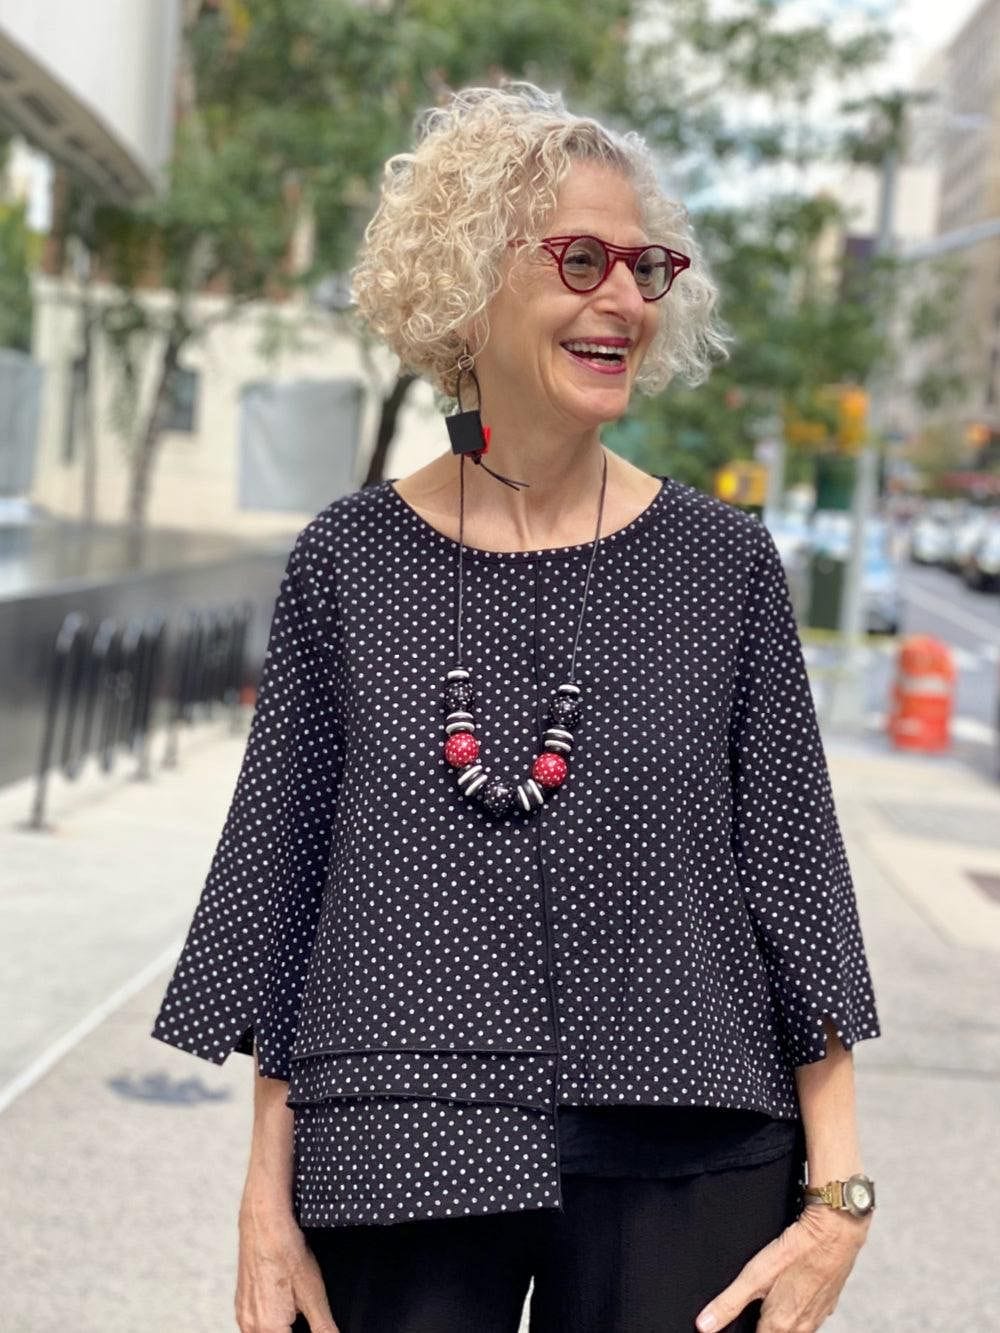 Smiling woman on the street wearing a black and white polka dot top with black and red earrings and necklace. She has blond hair and is a woman of a certain age.